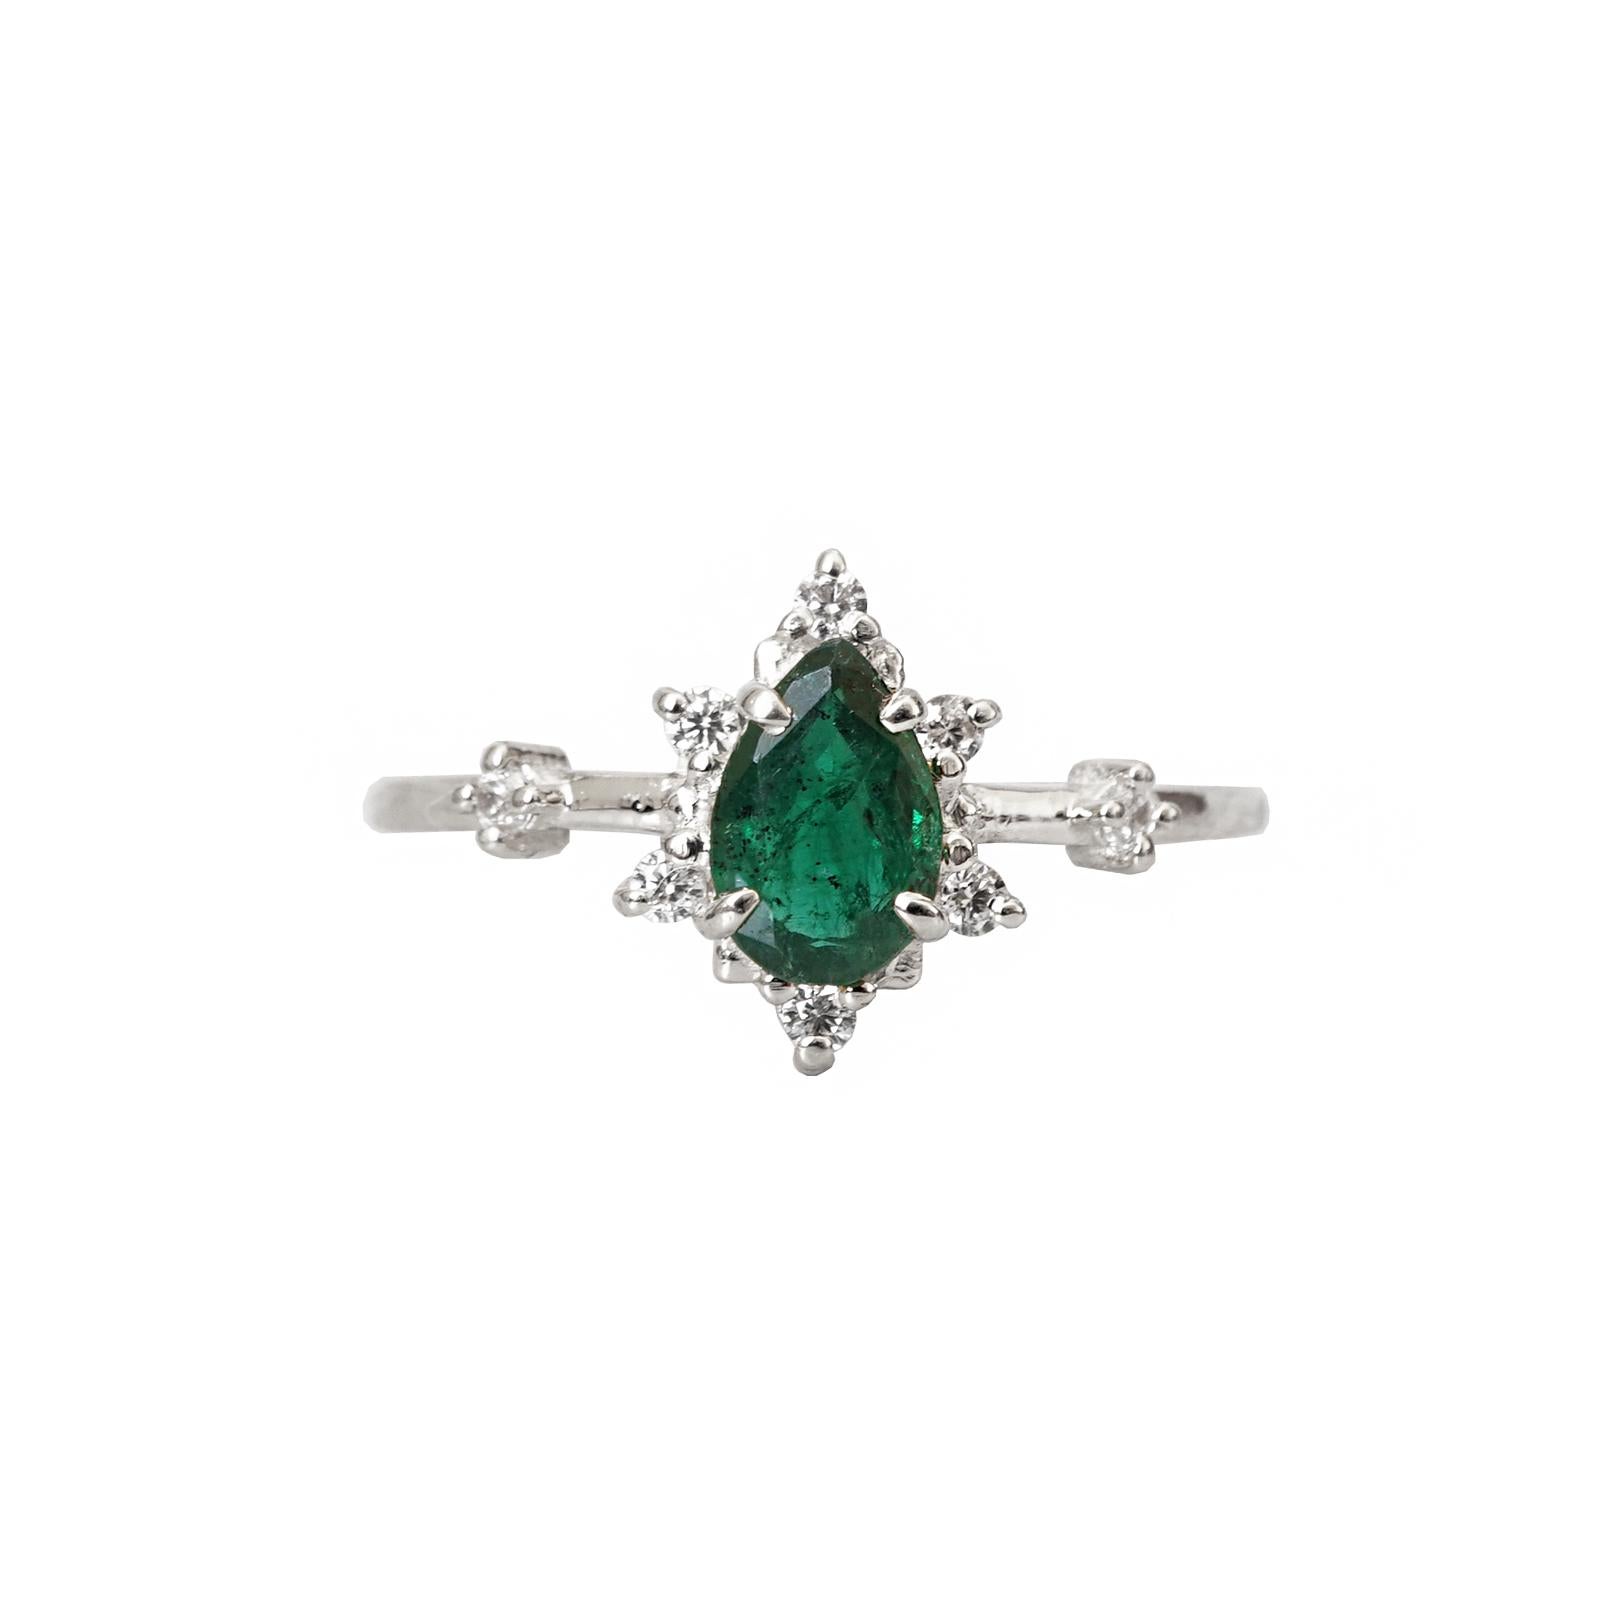 **This item is specially made for you. Please allow 1-2 week lead time. Indicate your ring size during checkout.

A ring of wisdom, truth and love. This Pear Emerald Diamond ring features a stunning rich green emerald set in 14K solid yellow gold